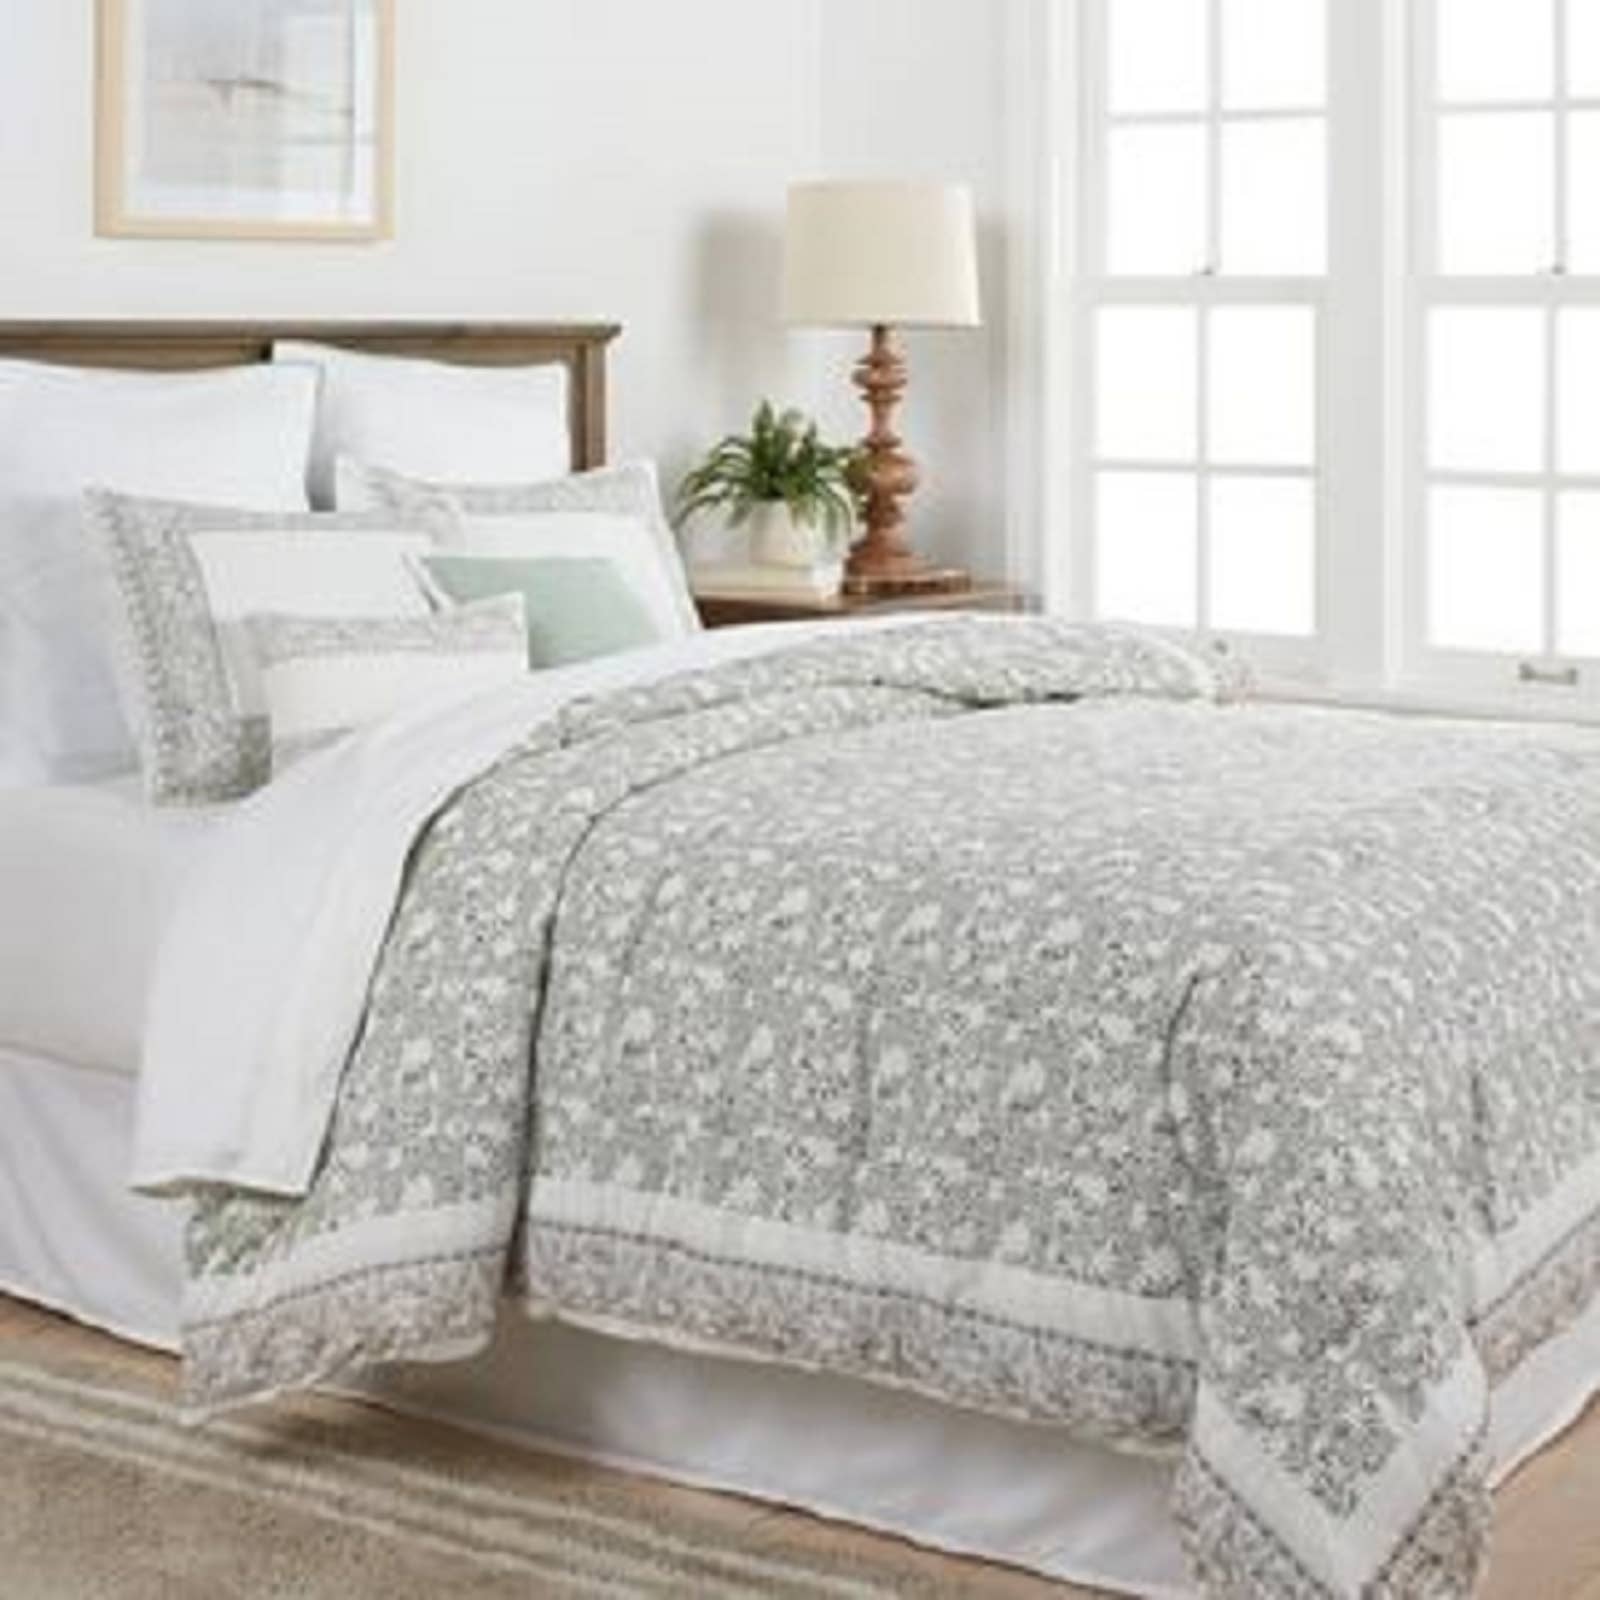 8pc Richland Floral Comforter Set Green - Queen New – Waleska Co.